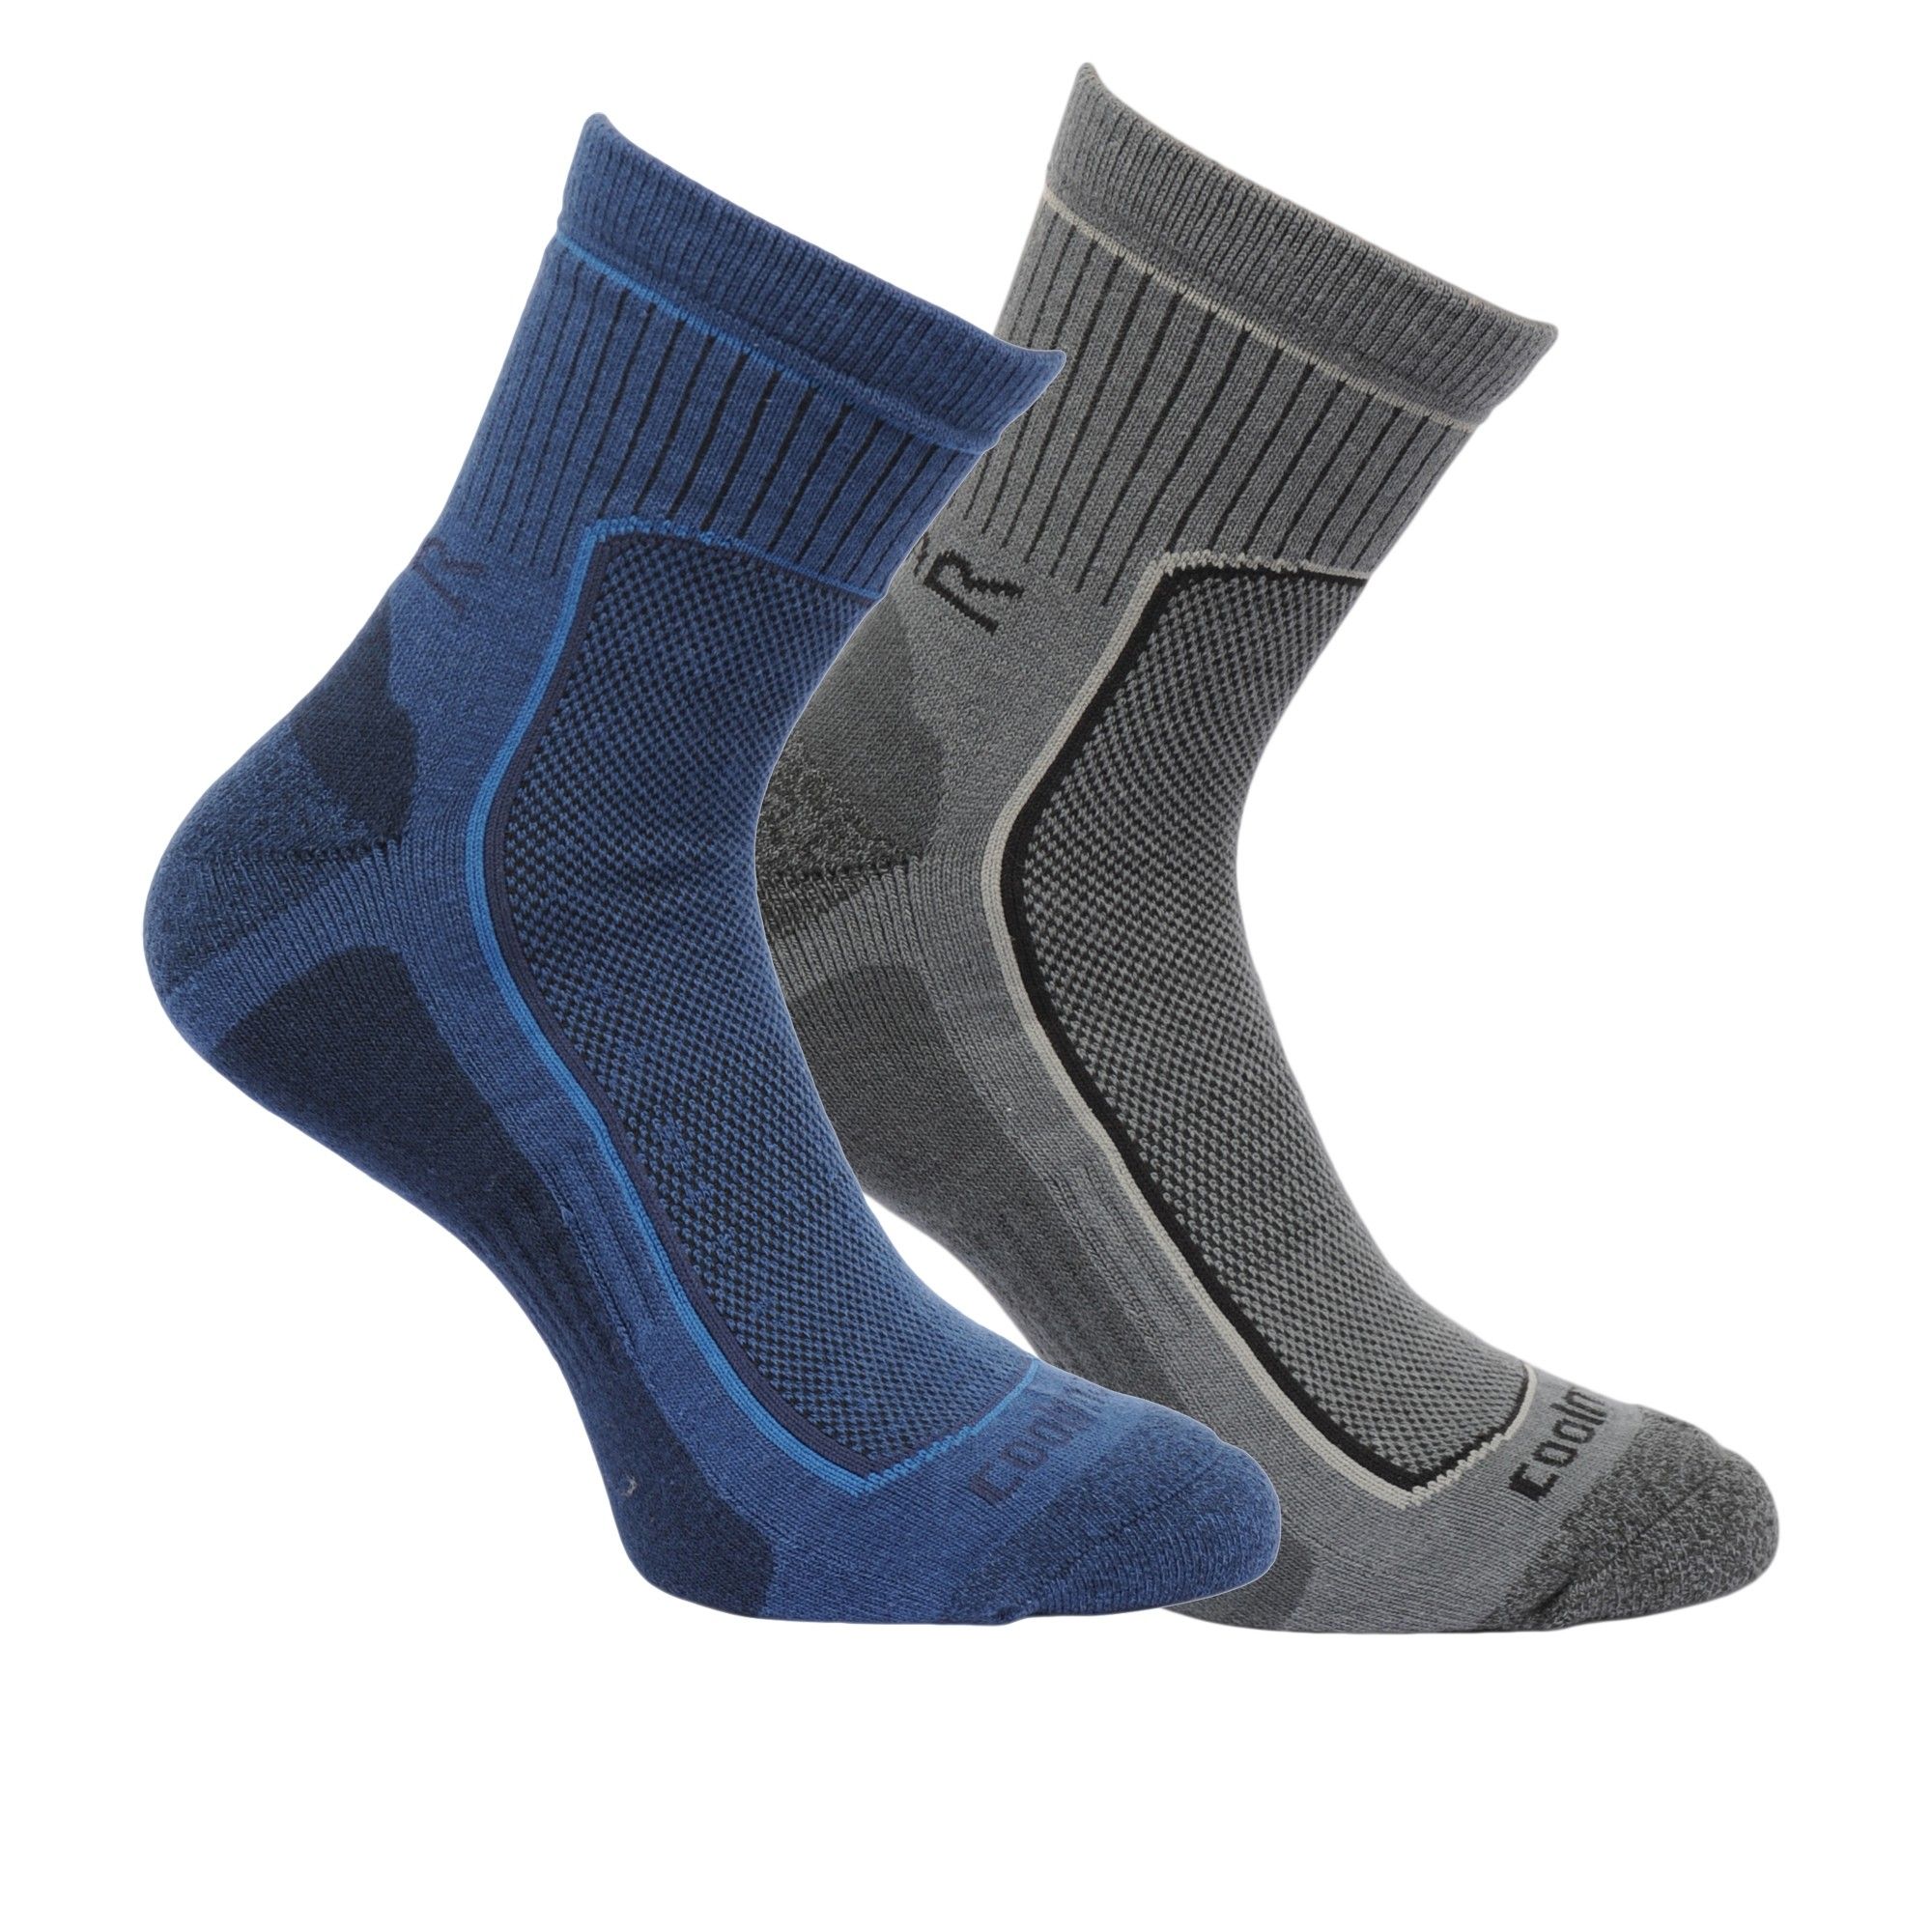 The mens Active Lifestyle Sock combines Coolmax fibres with a natural and synthetic blend for ultimate moisture-reducing comfort. Lightly cushioned to prevent rubbing, this comfy everyday pair come delivered in packs of two. Coolmax 38%, Cotton 35%, Polyester 15%, Polyamide 10%, Elastane 2%.